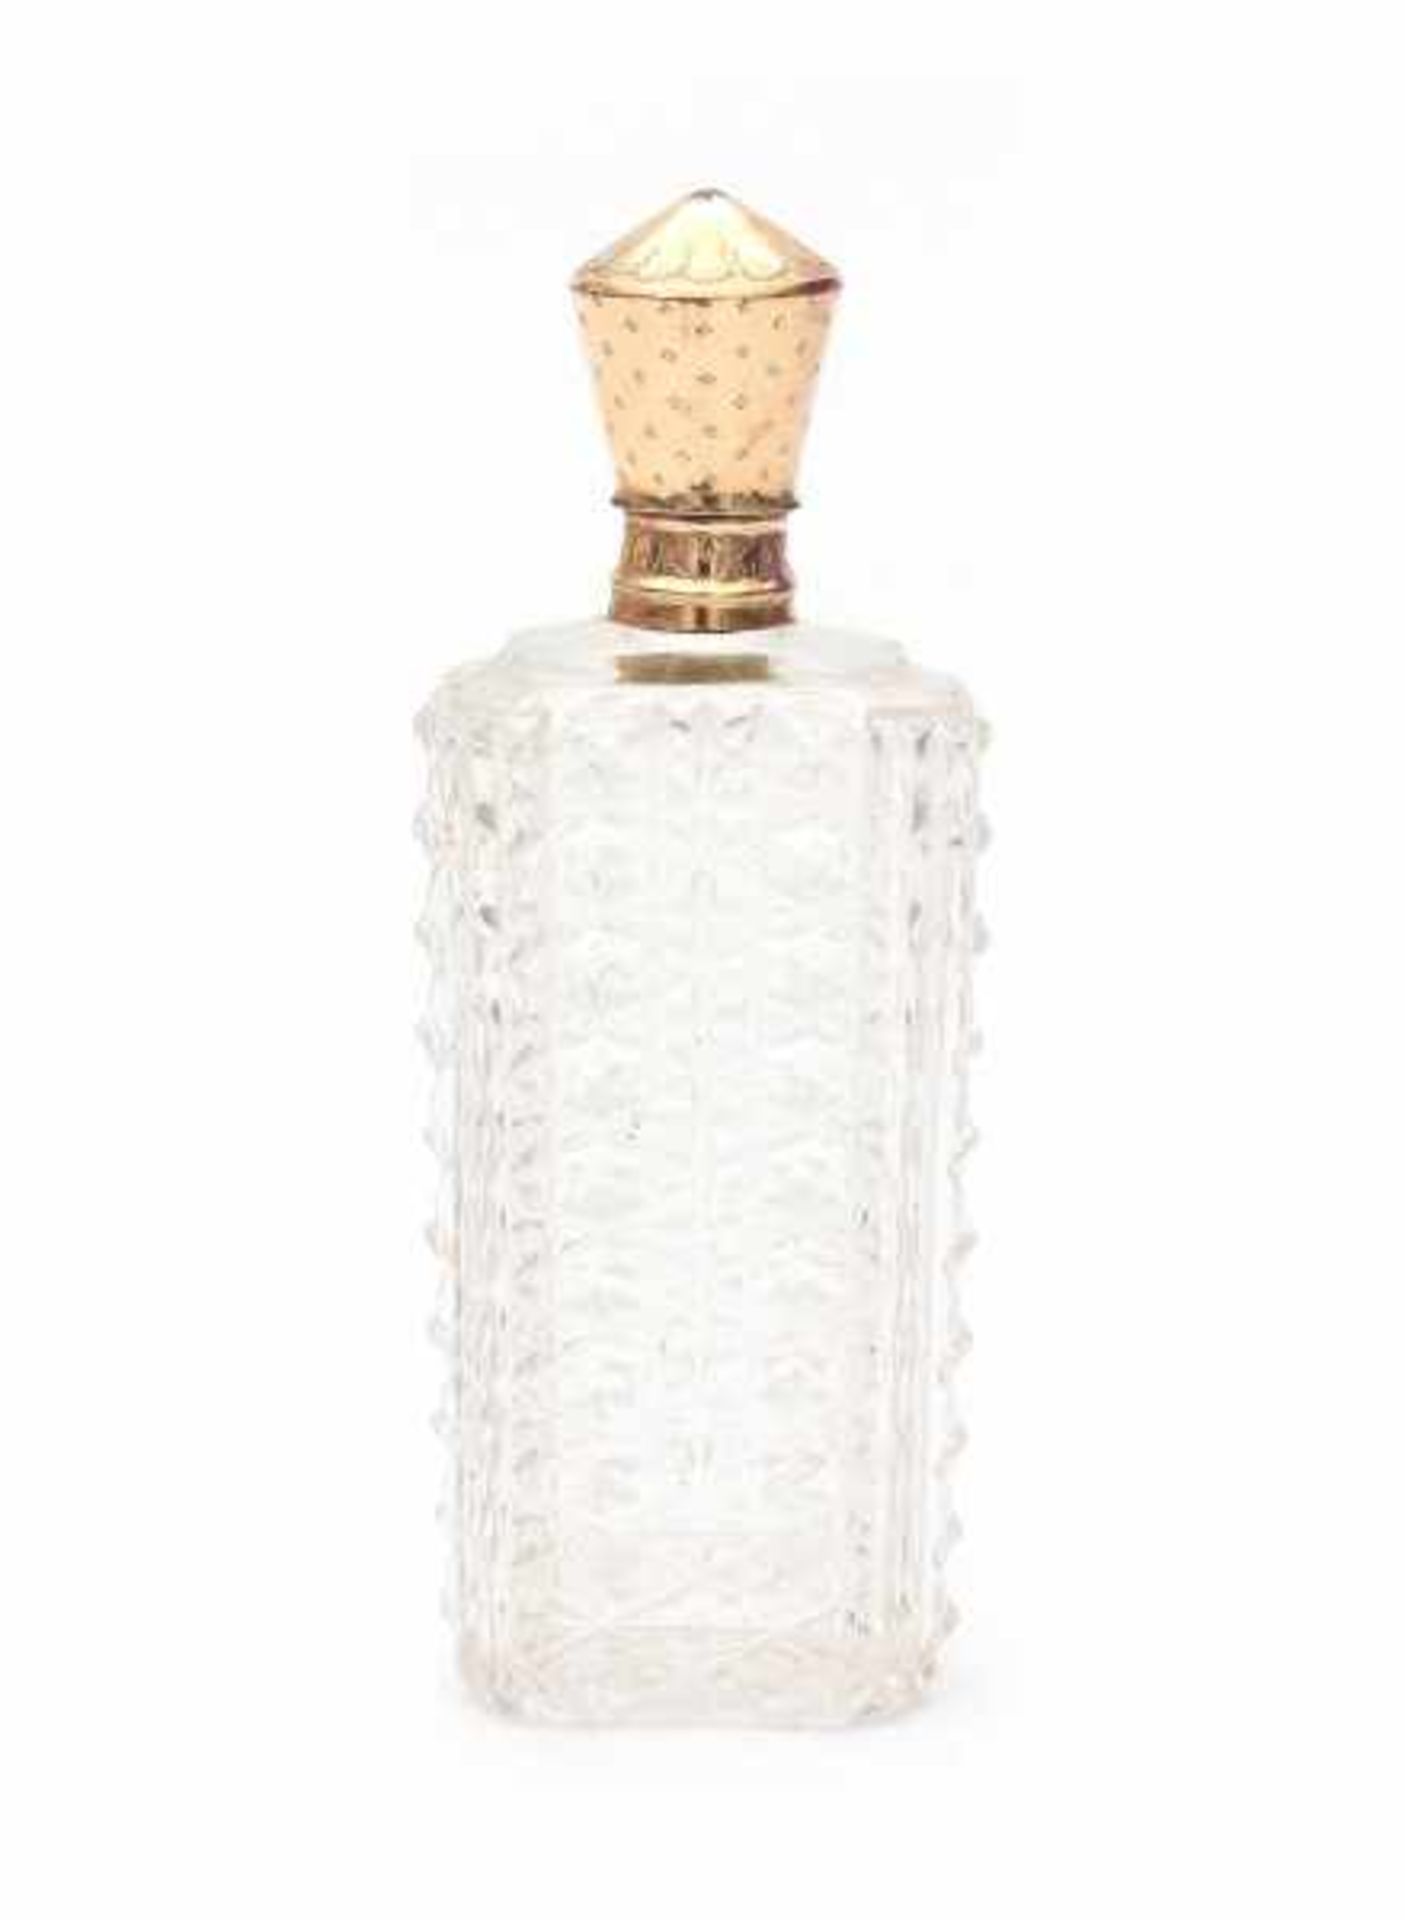 A crystal perfume bottle with a 14 carat rose gold cap in original leather case from the 19th